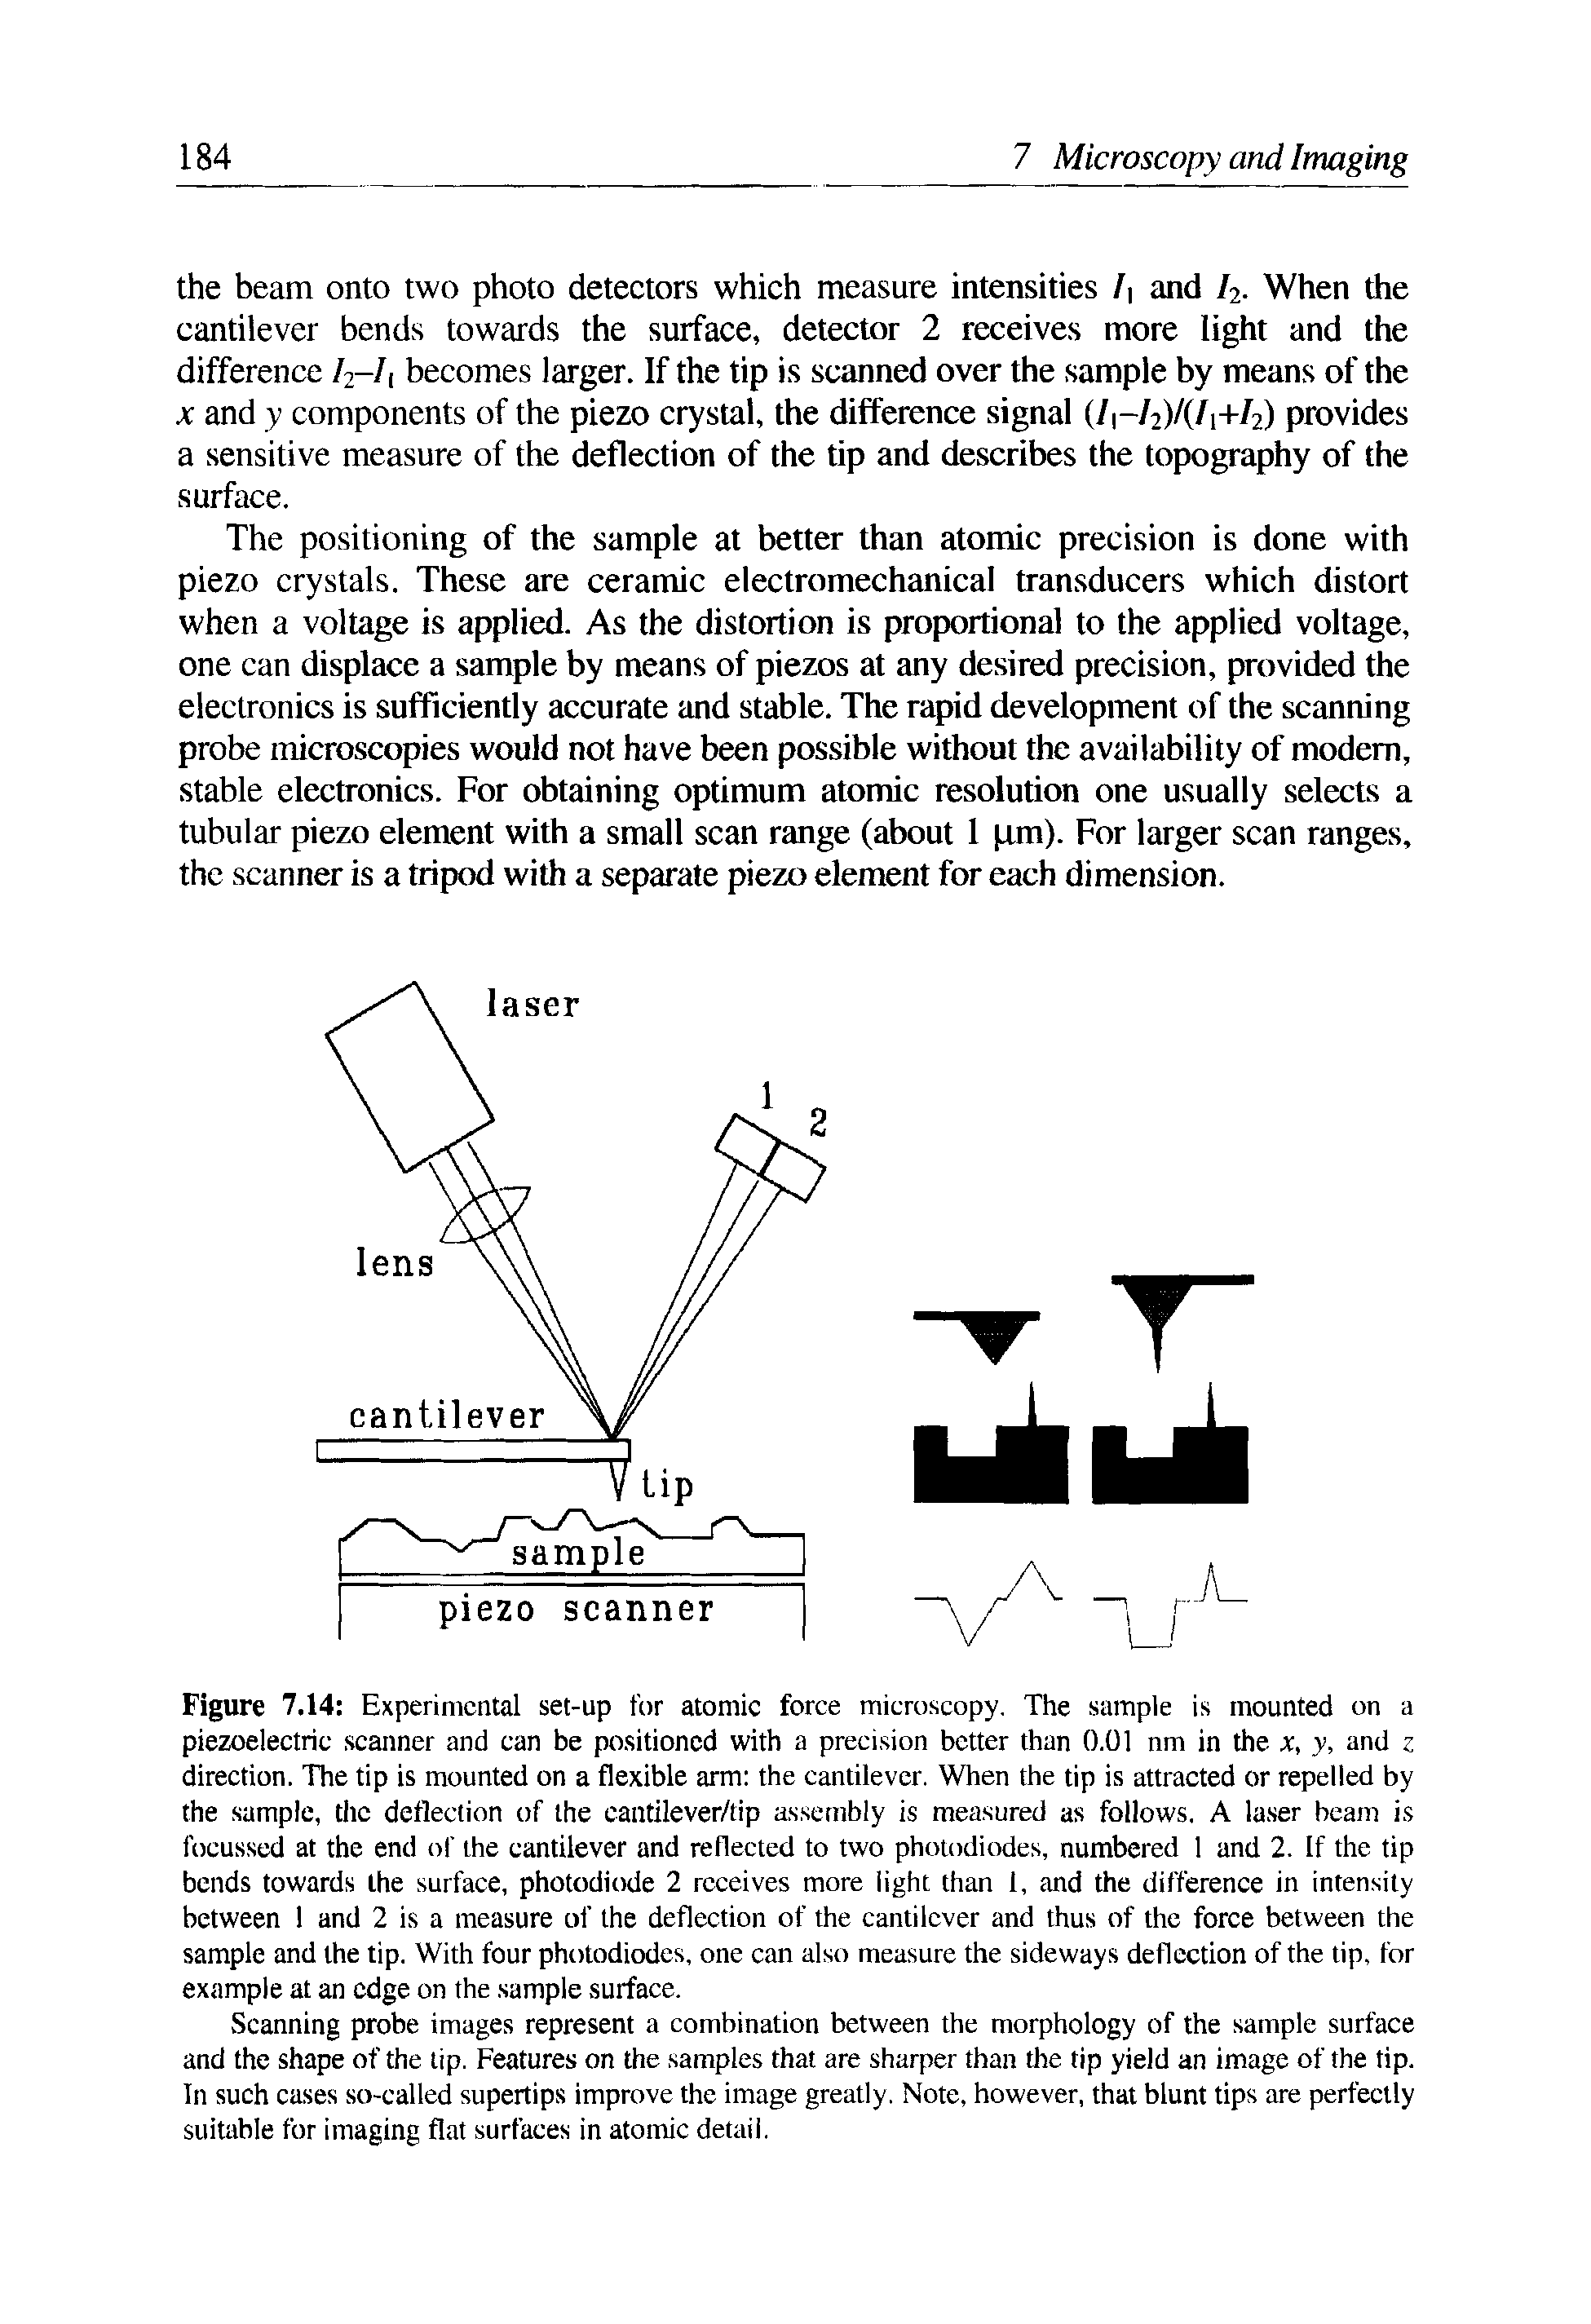 Figure 7.14 Experimental set-up for atomic force microscopy. The sample is mounted on a piezoelectric scanner and can be positioned with a precision better than 0.01 nm in the x, y, and z direction. The tip is mounted on a flexible arm the cantilever. When the tip is attracted or repelled by the sample, the deflection of the cantilever/tip assembly is measured as follows. A laser beam is focussed at the end of the cantilever and reflected to two photodiodes, numbered 1 and 2. If the tip bends towards the surface, photodiode 2 receives more light than 1, and the difference in intensity between 1 and 2 is a measure of the deflection of the cantilever and thus of the force between the sample and the tip. With four photodiodes, one can also measure the sideways deflection of the tip, for example at an edge on the sample surface.